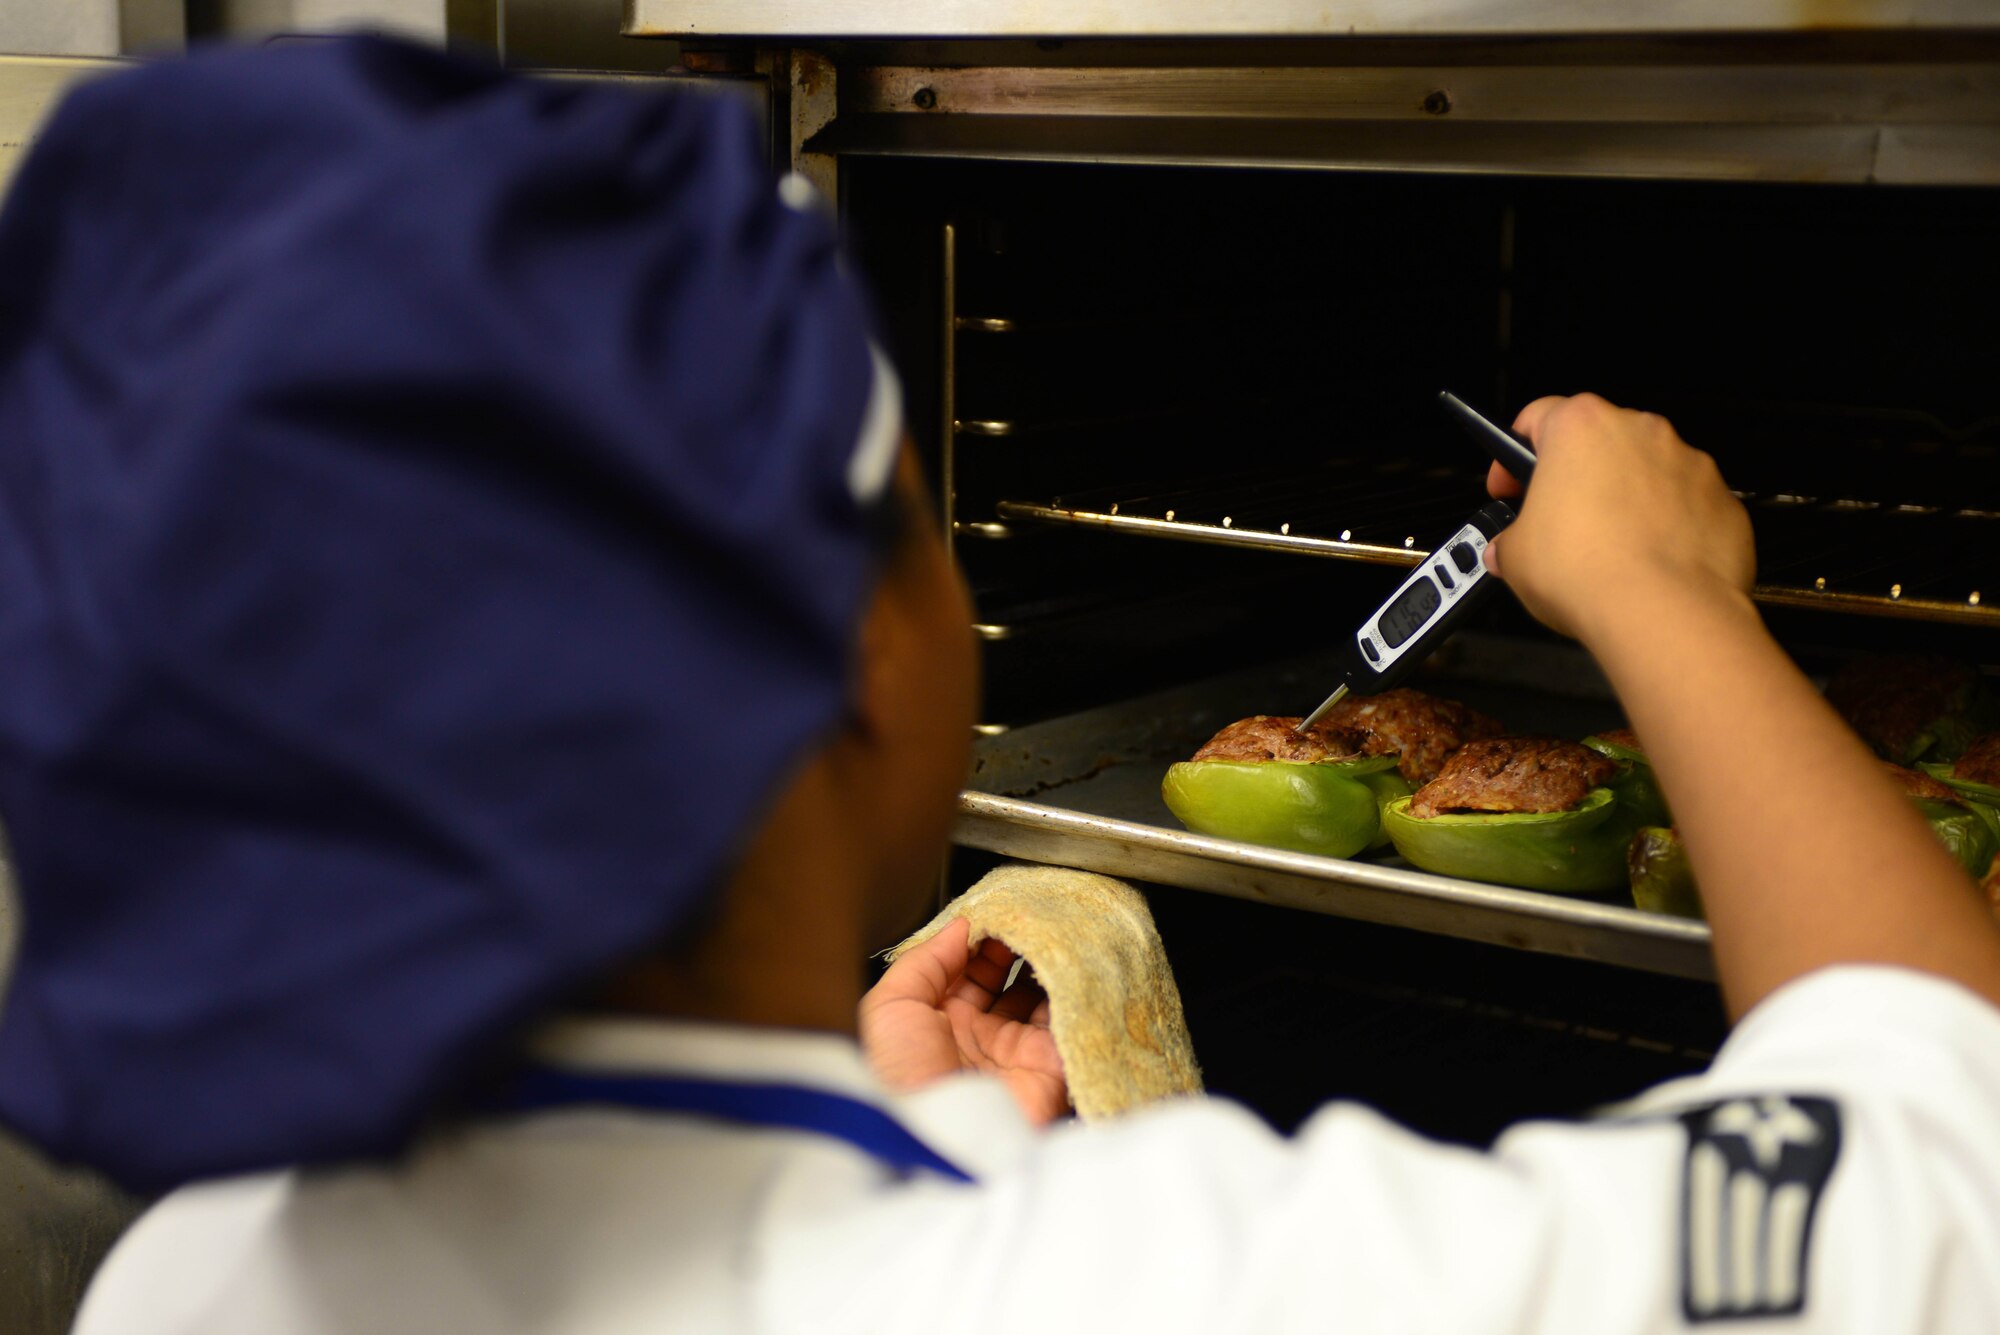 Senior Airman Caprice Walker, a food services journeyman assigned to the 28th Force Support Squadron, checks the temperature of stuffed peppers inside the Raider Café at Ellsworth Air Force Base, S.D., Jan. 11, 2018.